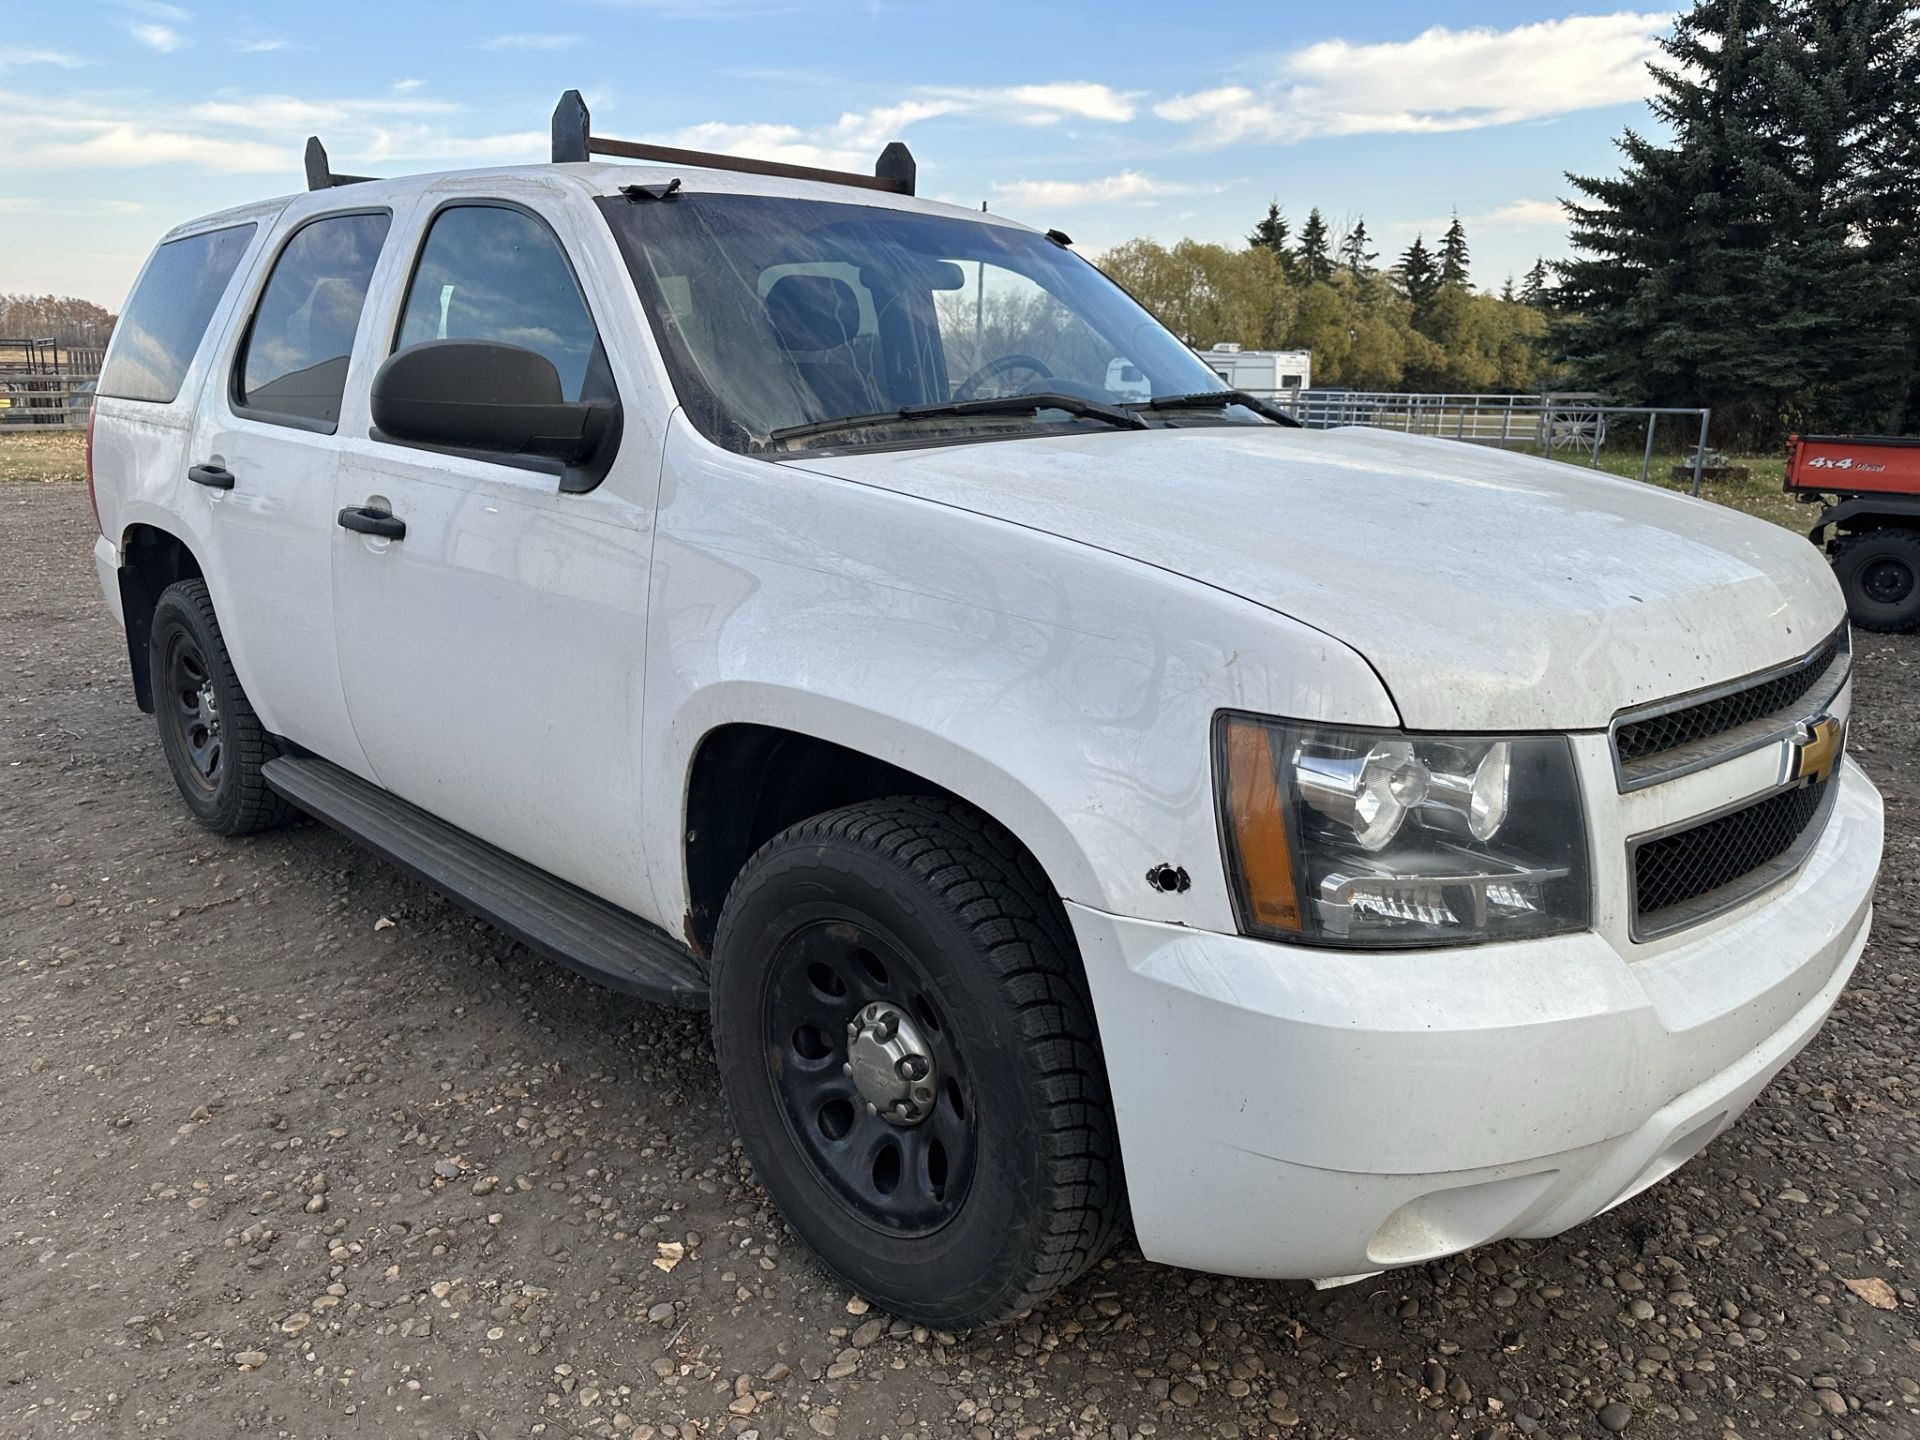 2013 CHEVROLET TAHOE SUV, 2WD, 5-PASS, 233,718 KMS SHOWING, (FORMER POLICE VEHICLE) - Image 2 of 12